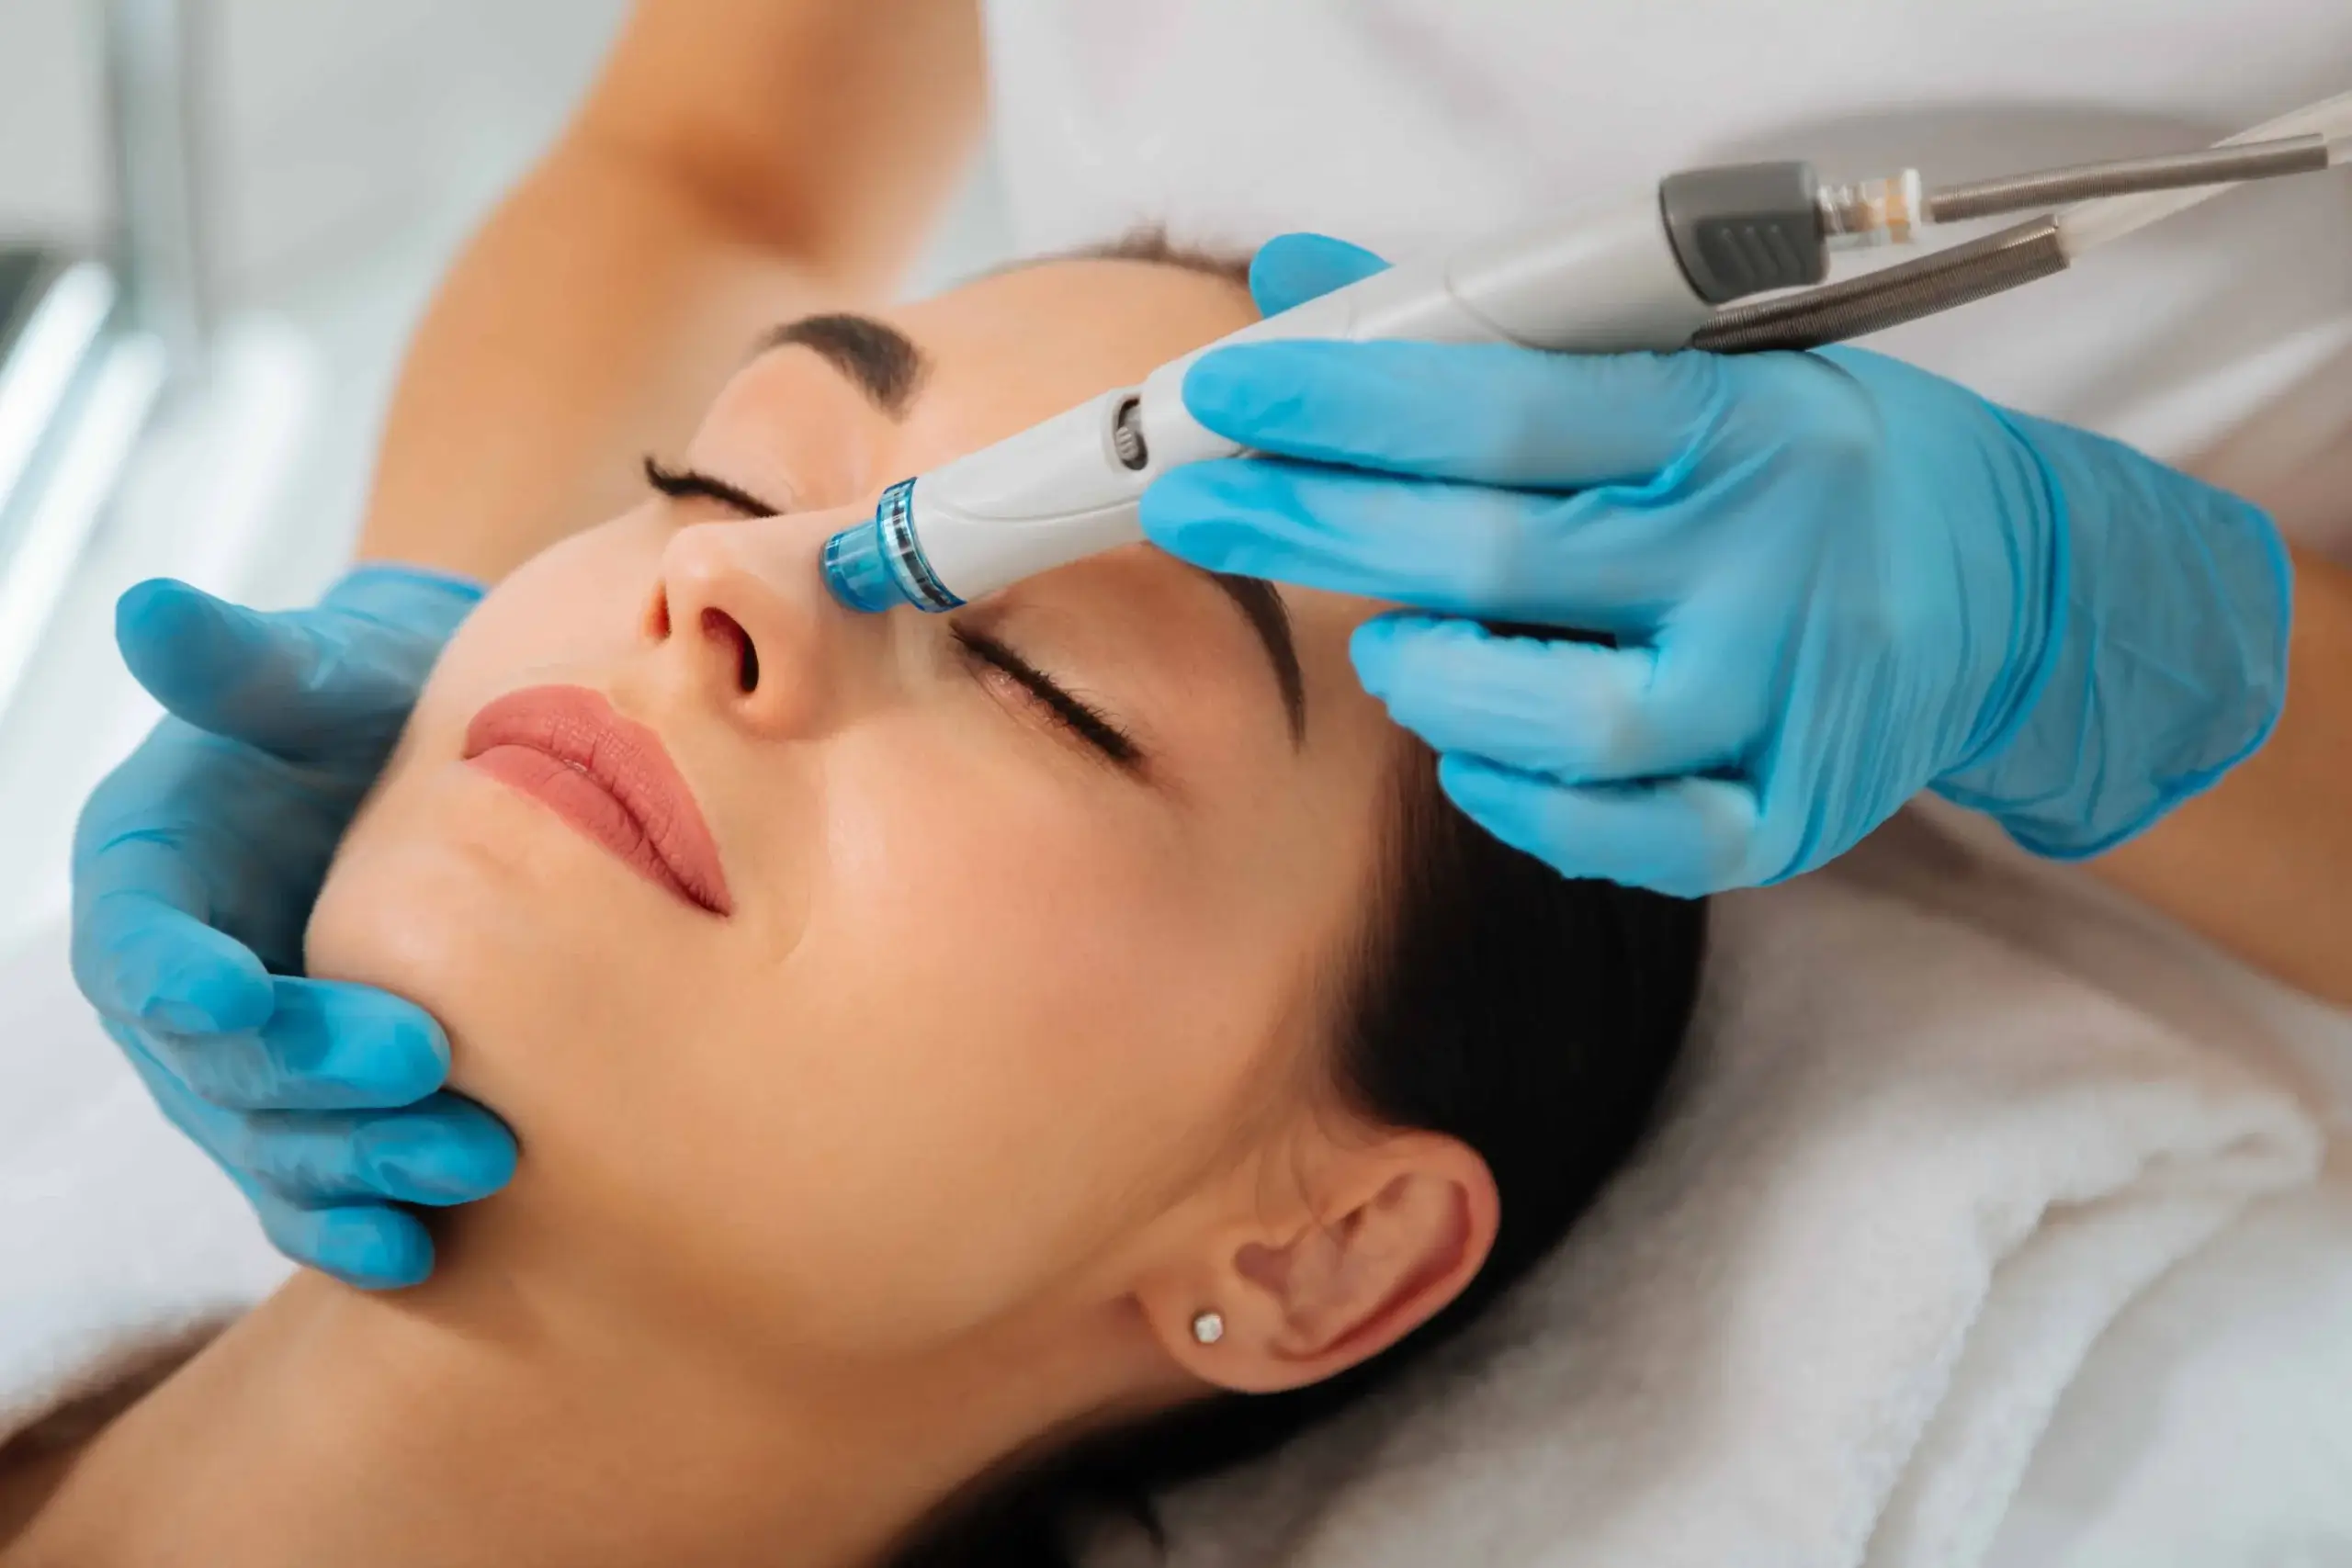 Women in Facial Treatment | soul and beauty medx. | Mission Viejo, CA